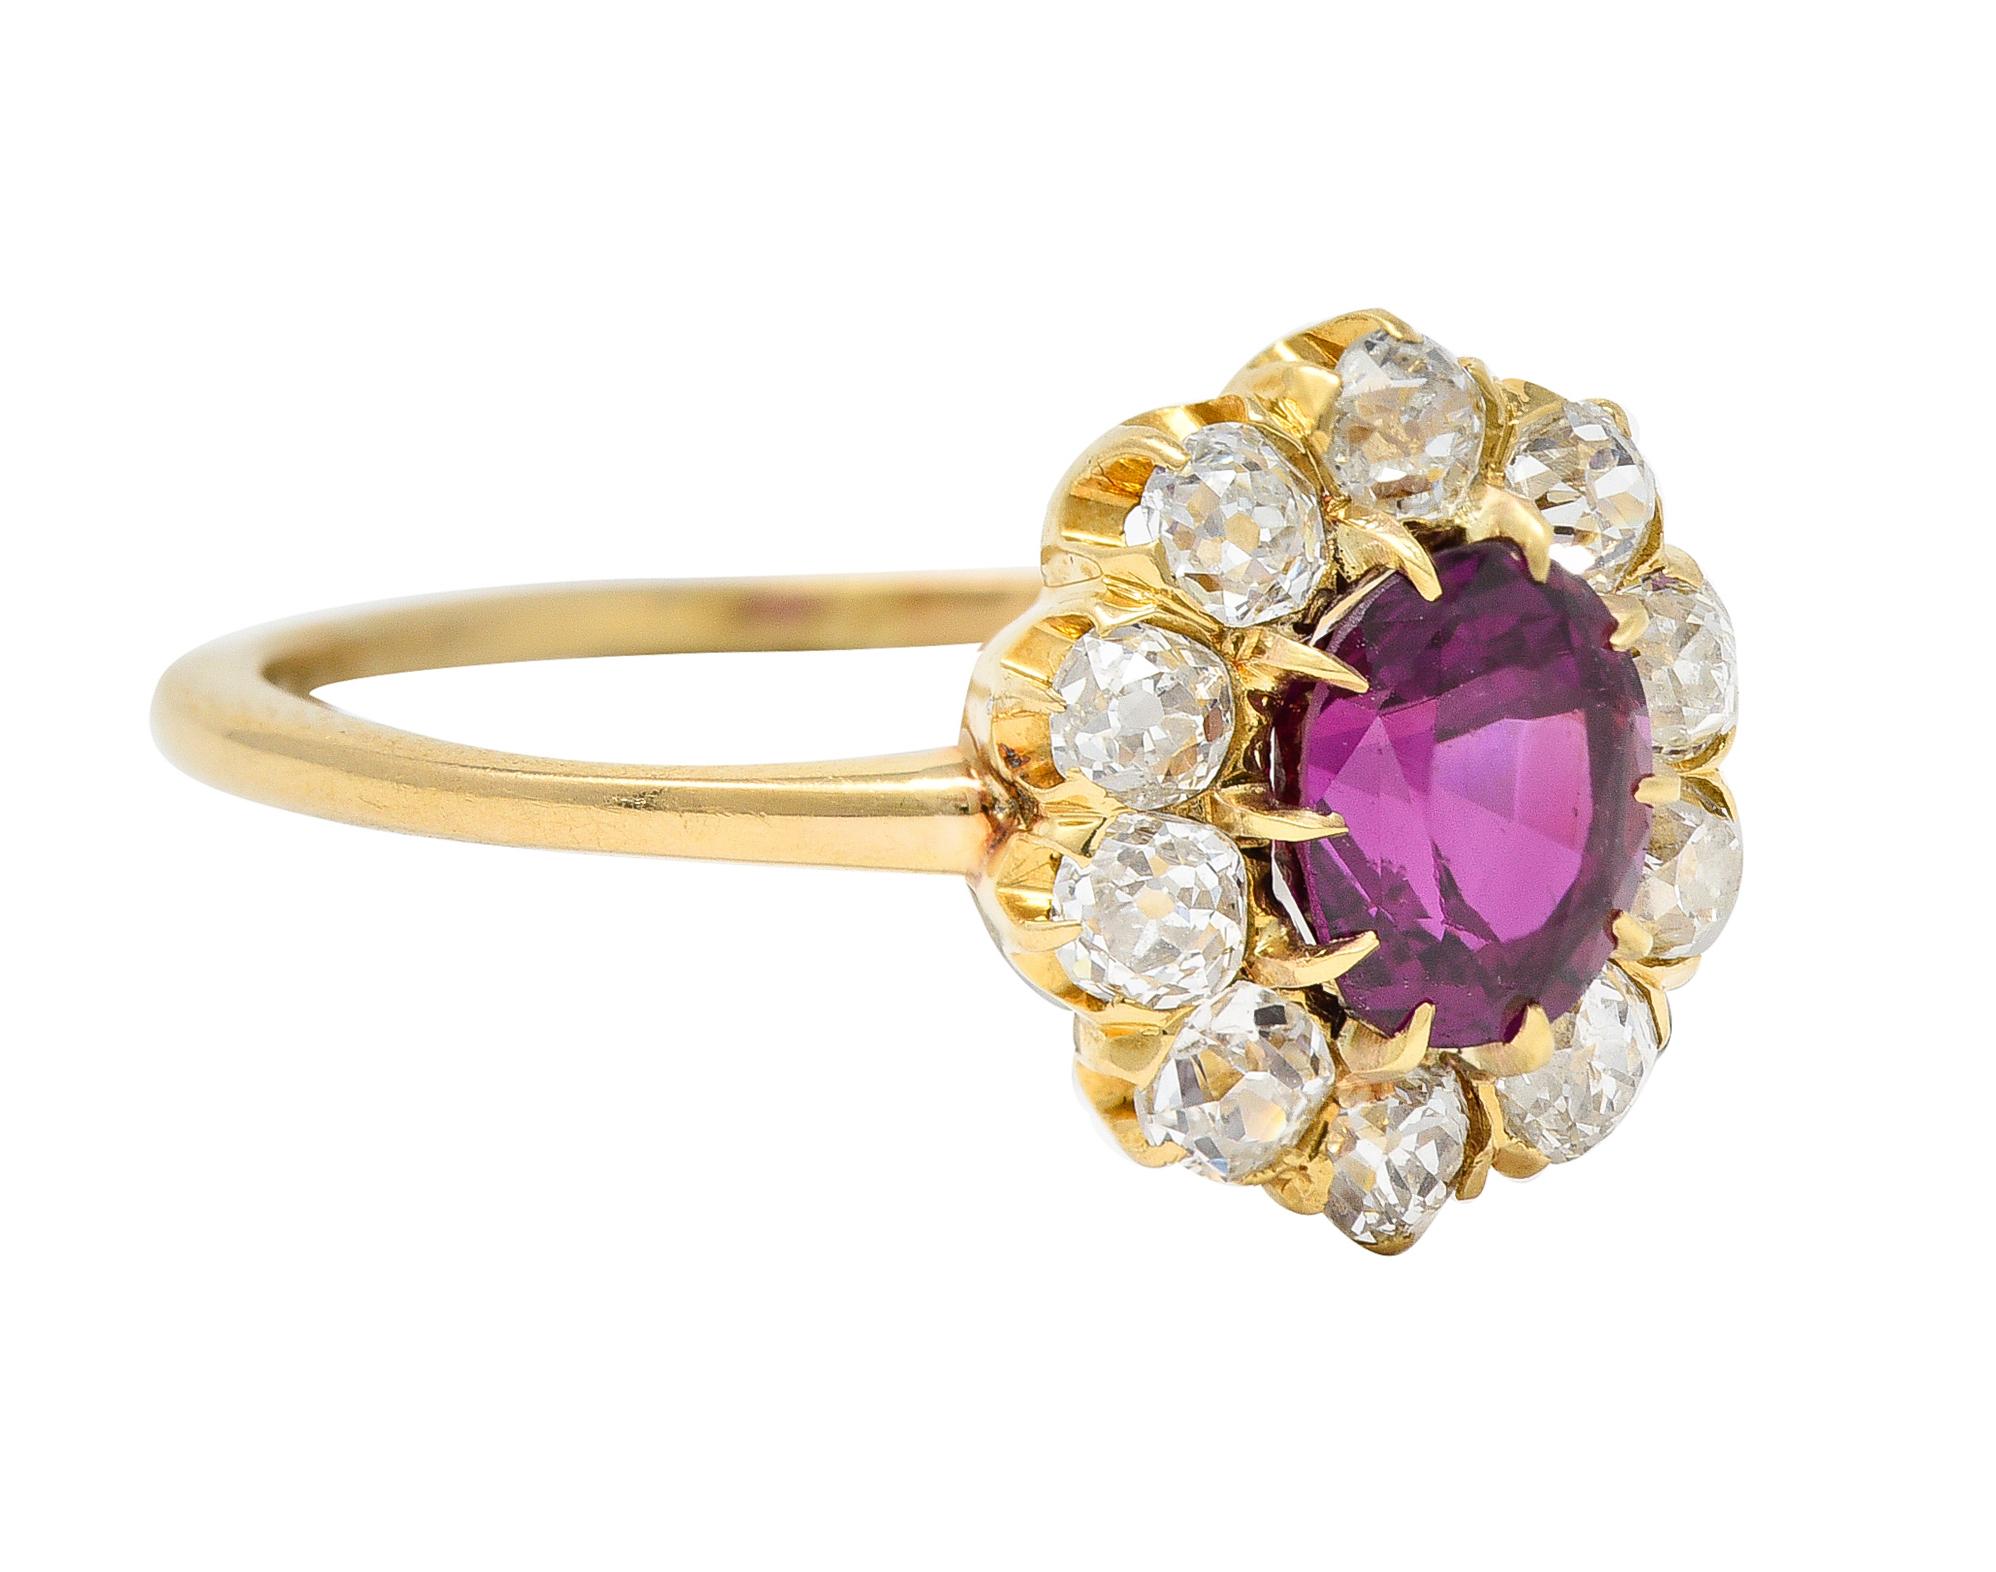 Centering an oval cut ruby weighing approximately 1.22 carats - transparent medium purplish red. Set with talon prongs with a cluster surround of old mine cut diamonds. Weighing approximately 0.60 carat total. I/J in color - clarity consistent with